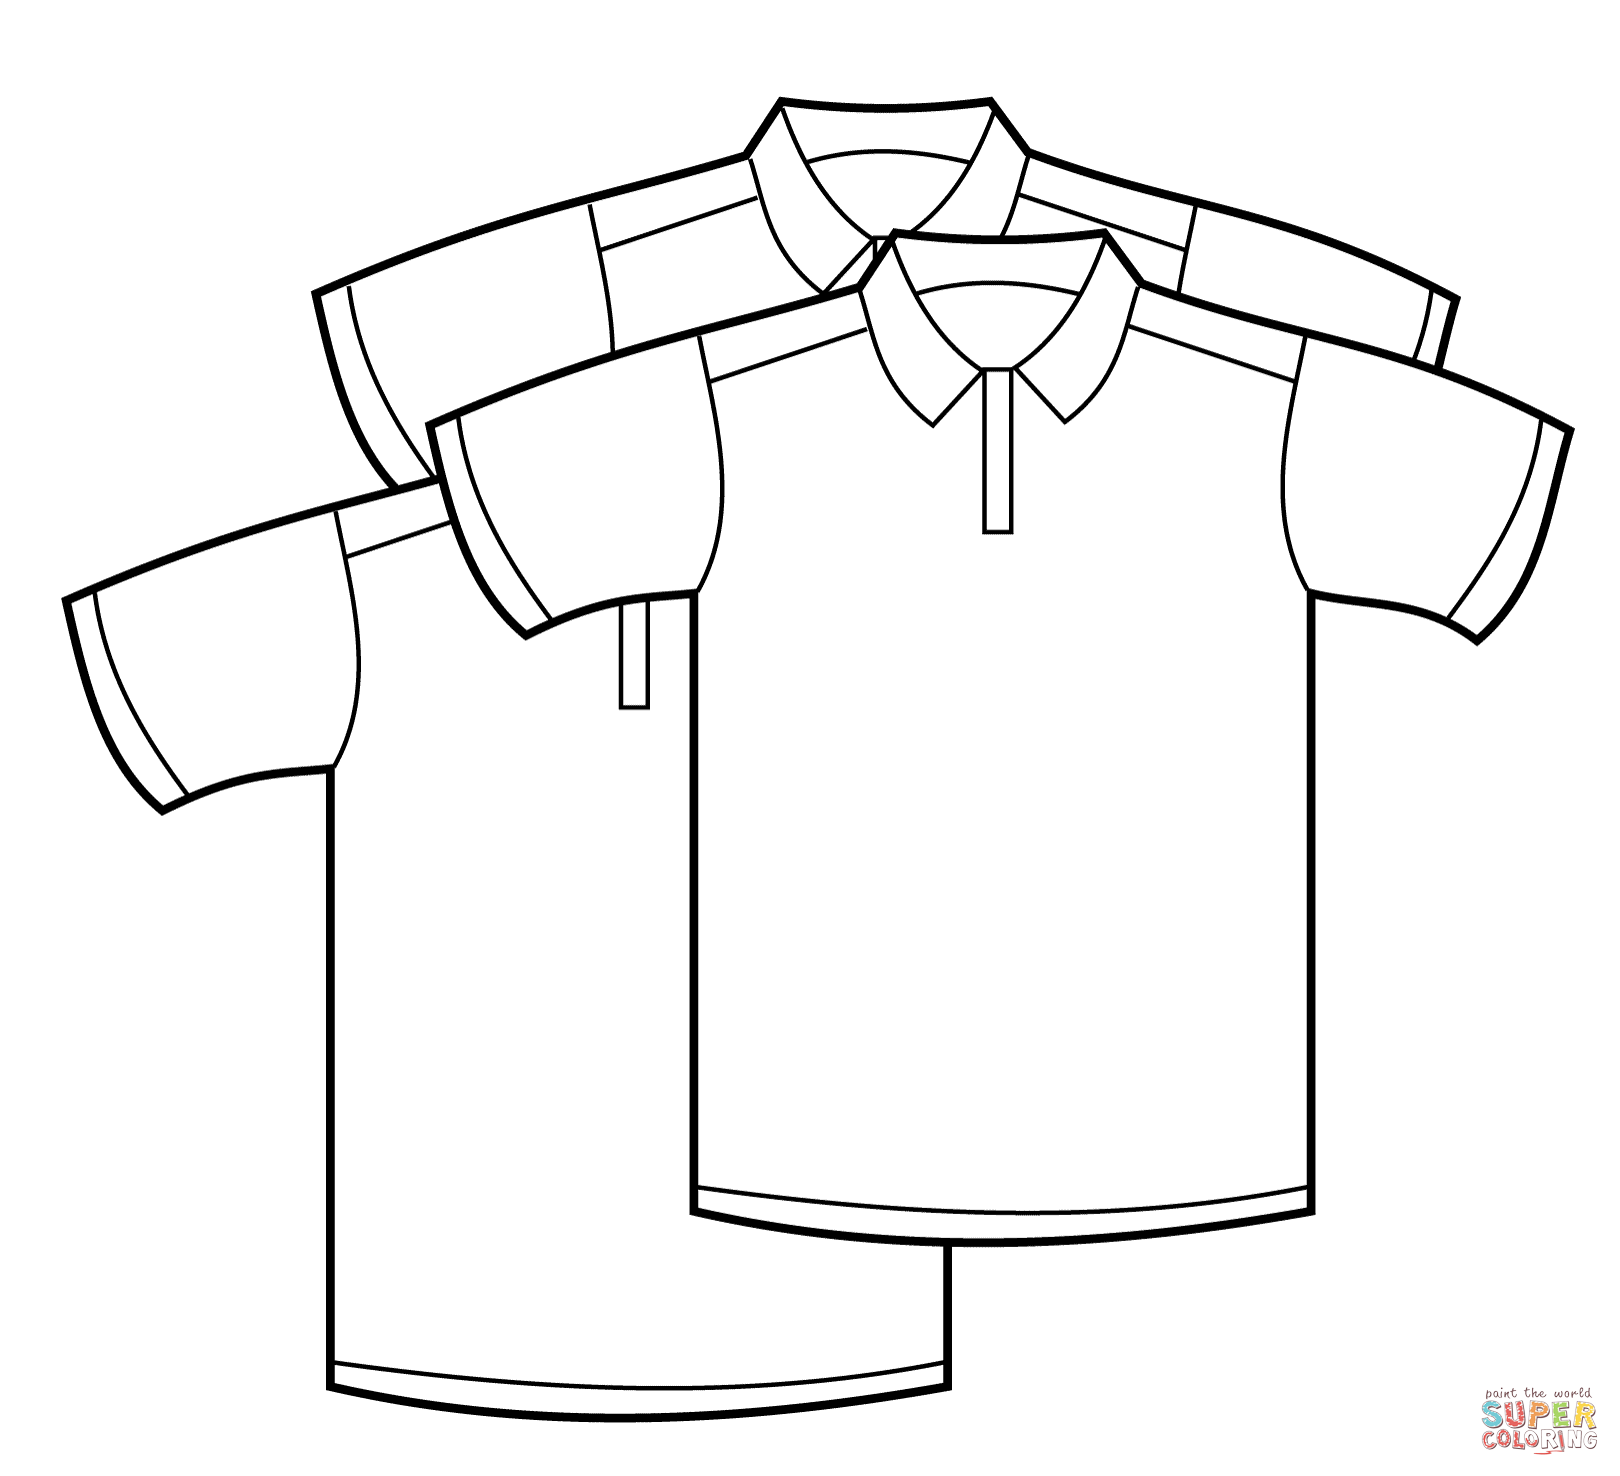 Polo Shirts coloring page | Free Printable Coloring Pages